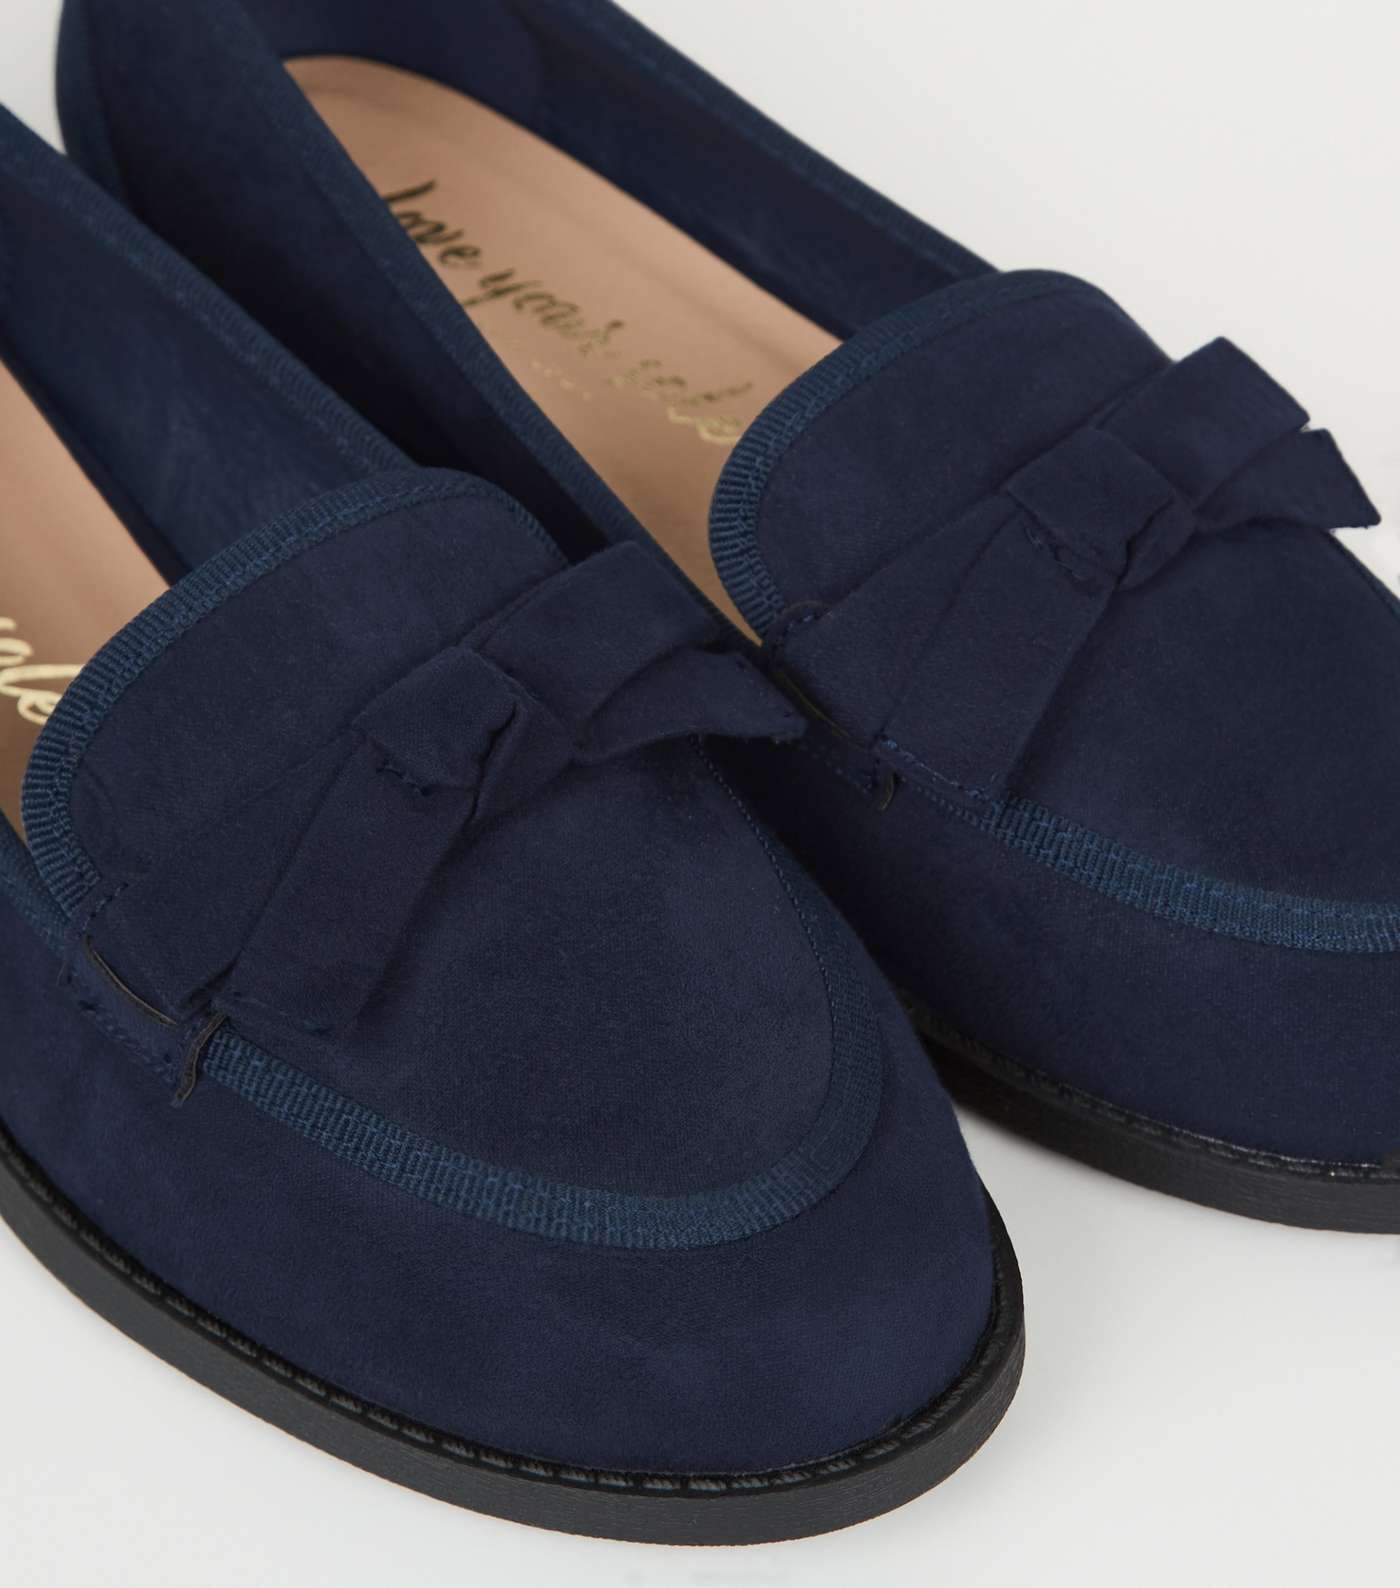 Wide Fit Navy Suedette Bow Front Loafers Image 3